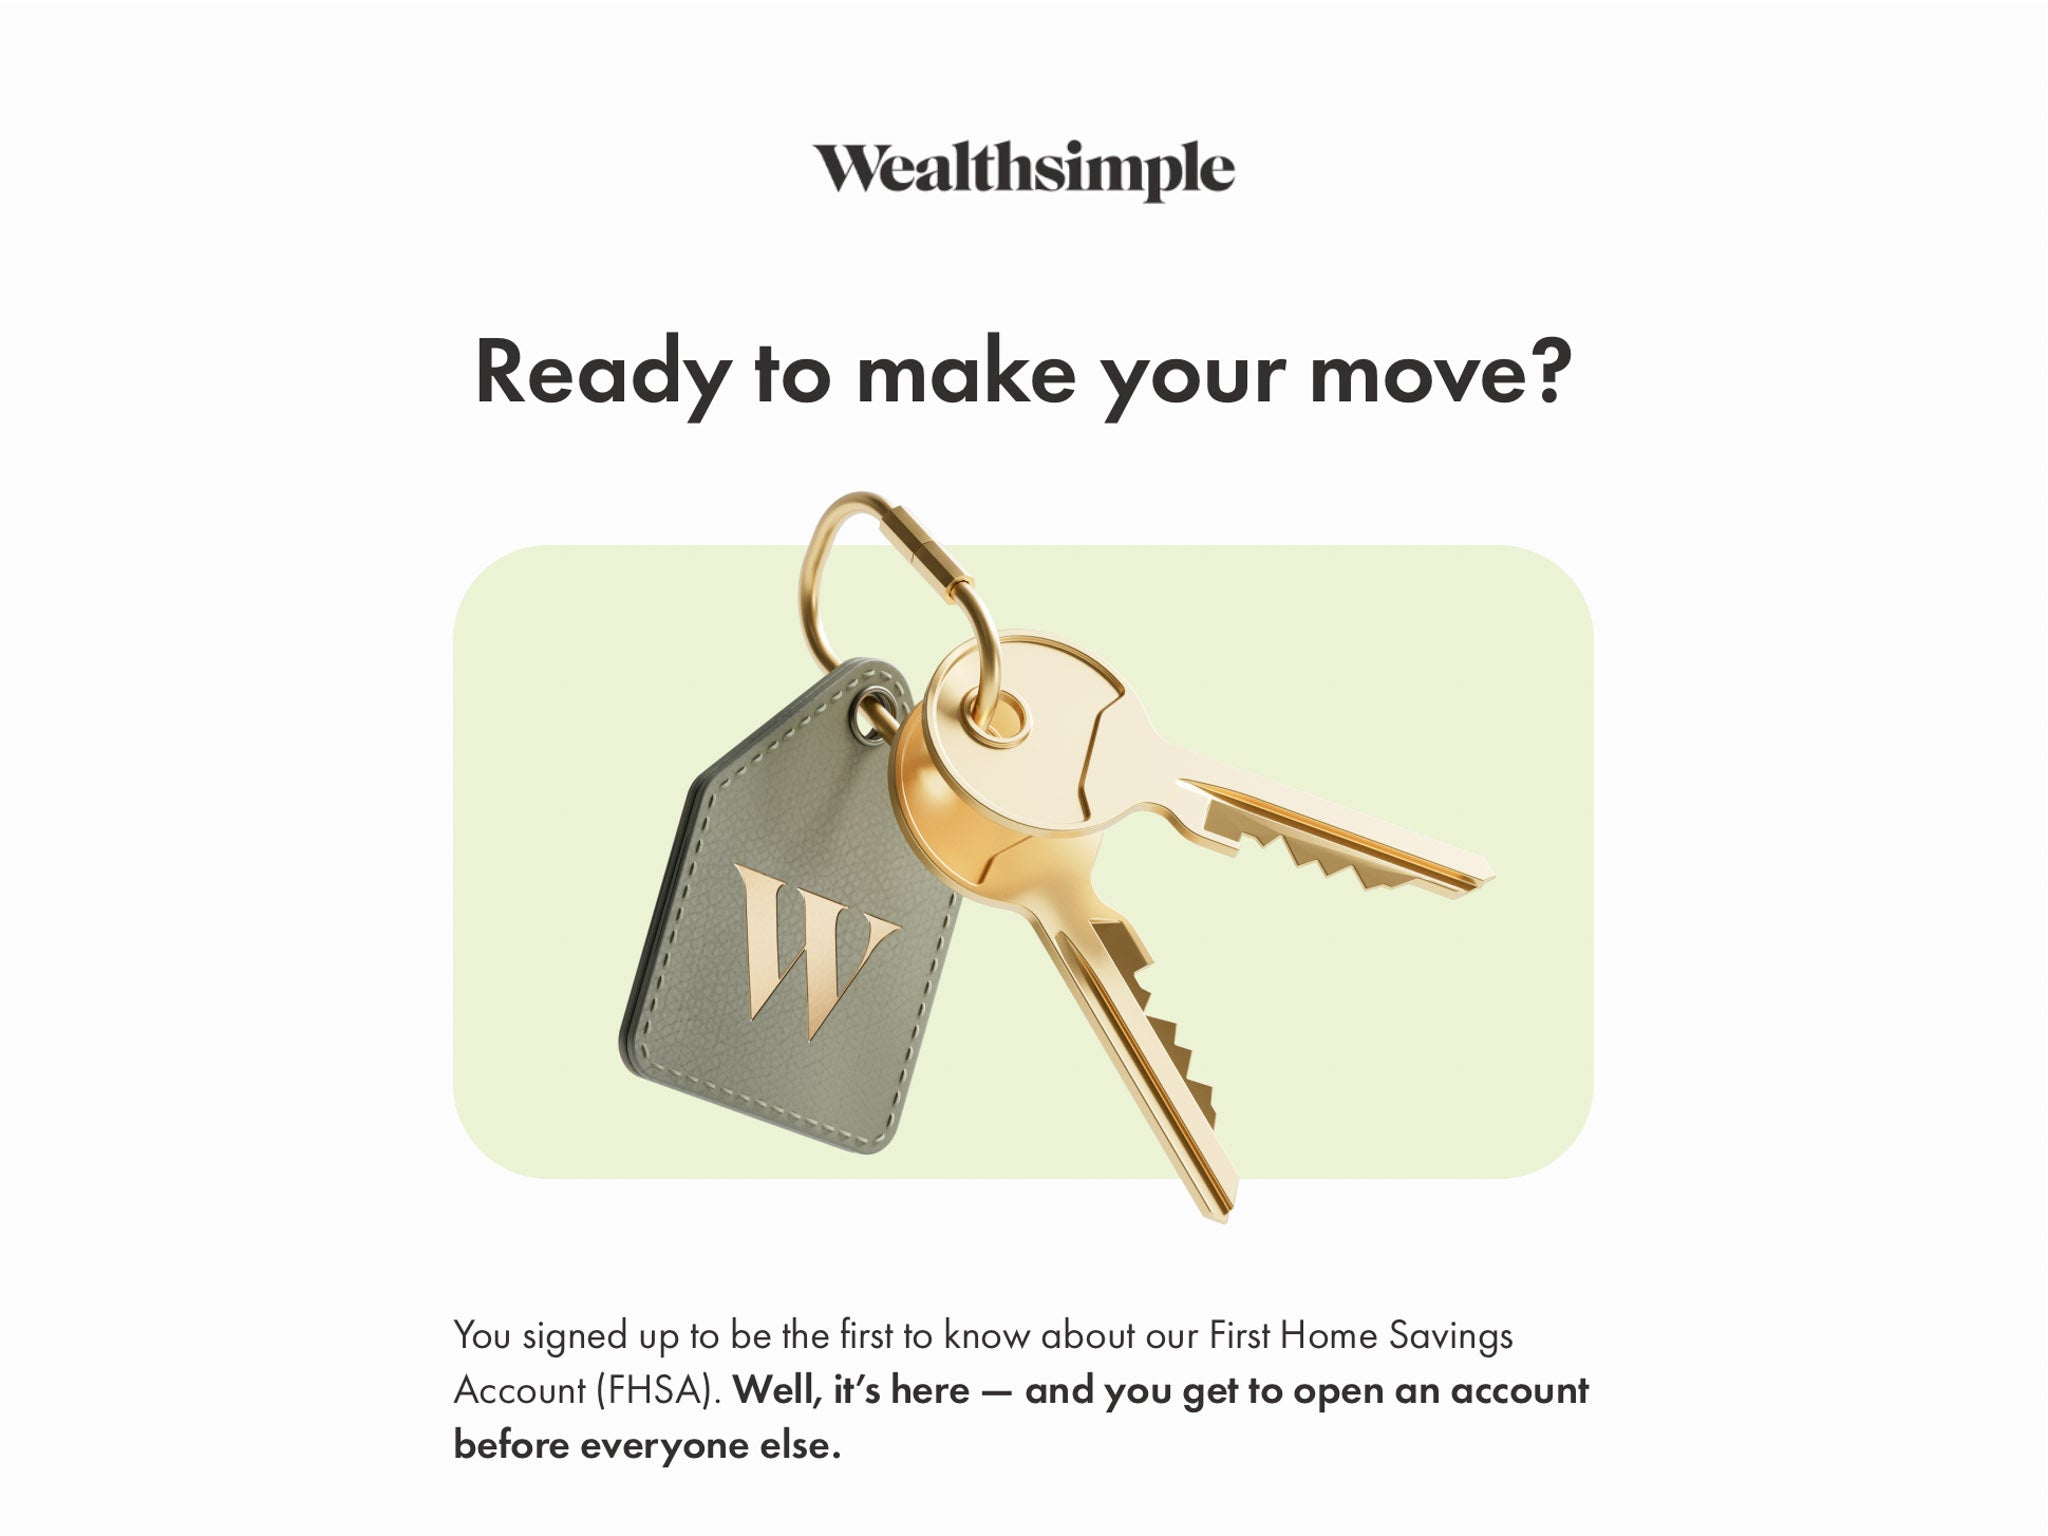 When Will Wealthsimple Offer the FHSA?